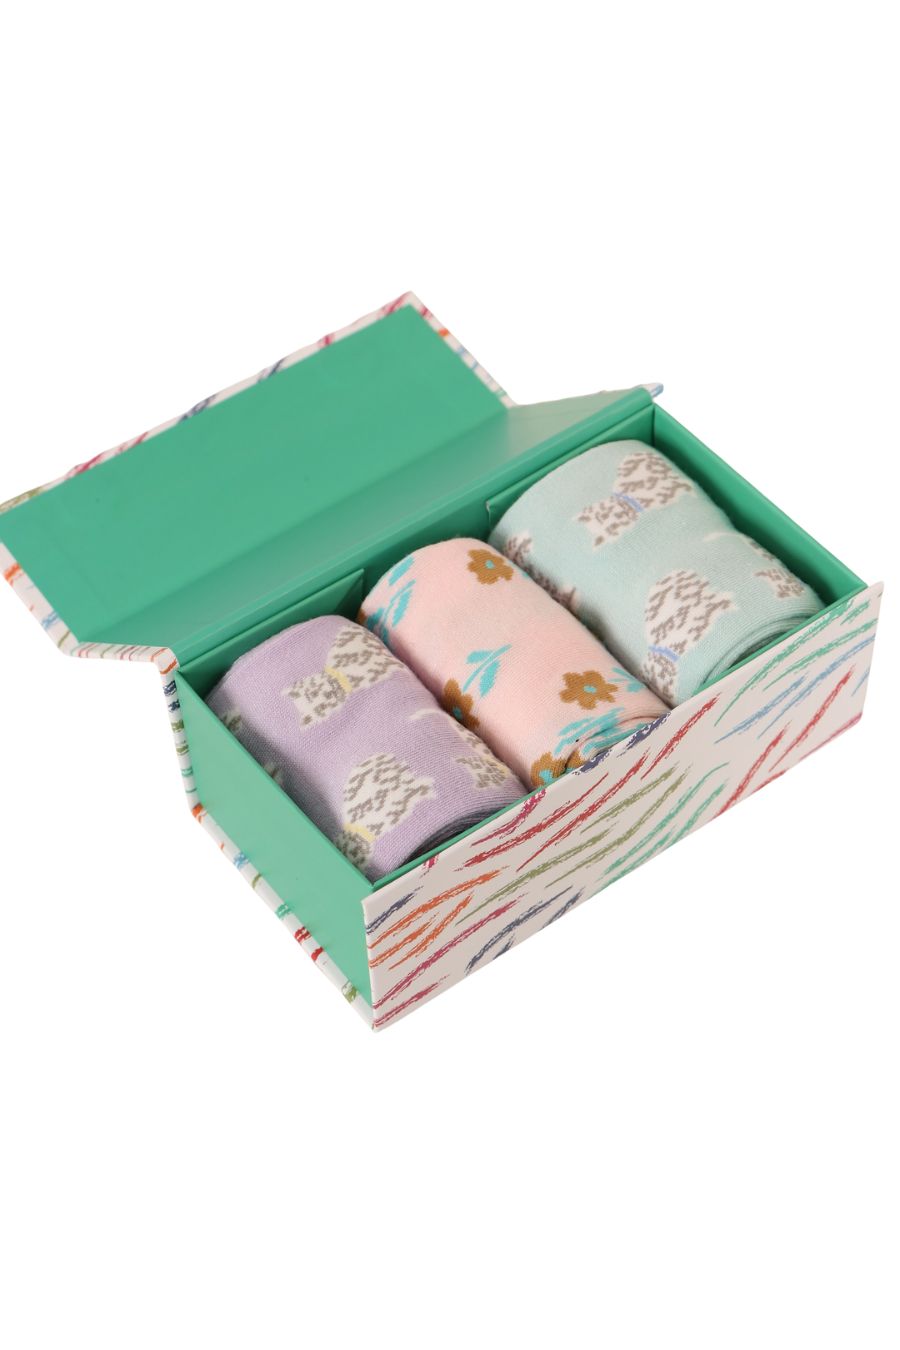 open gift box showing one pair of floral socks and two pairs of highland terrier pattern socks